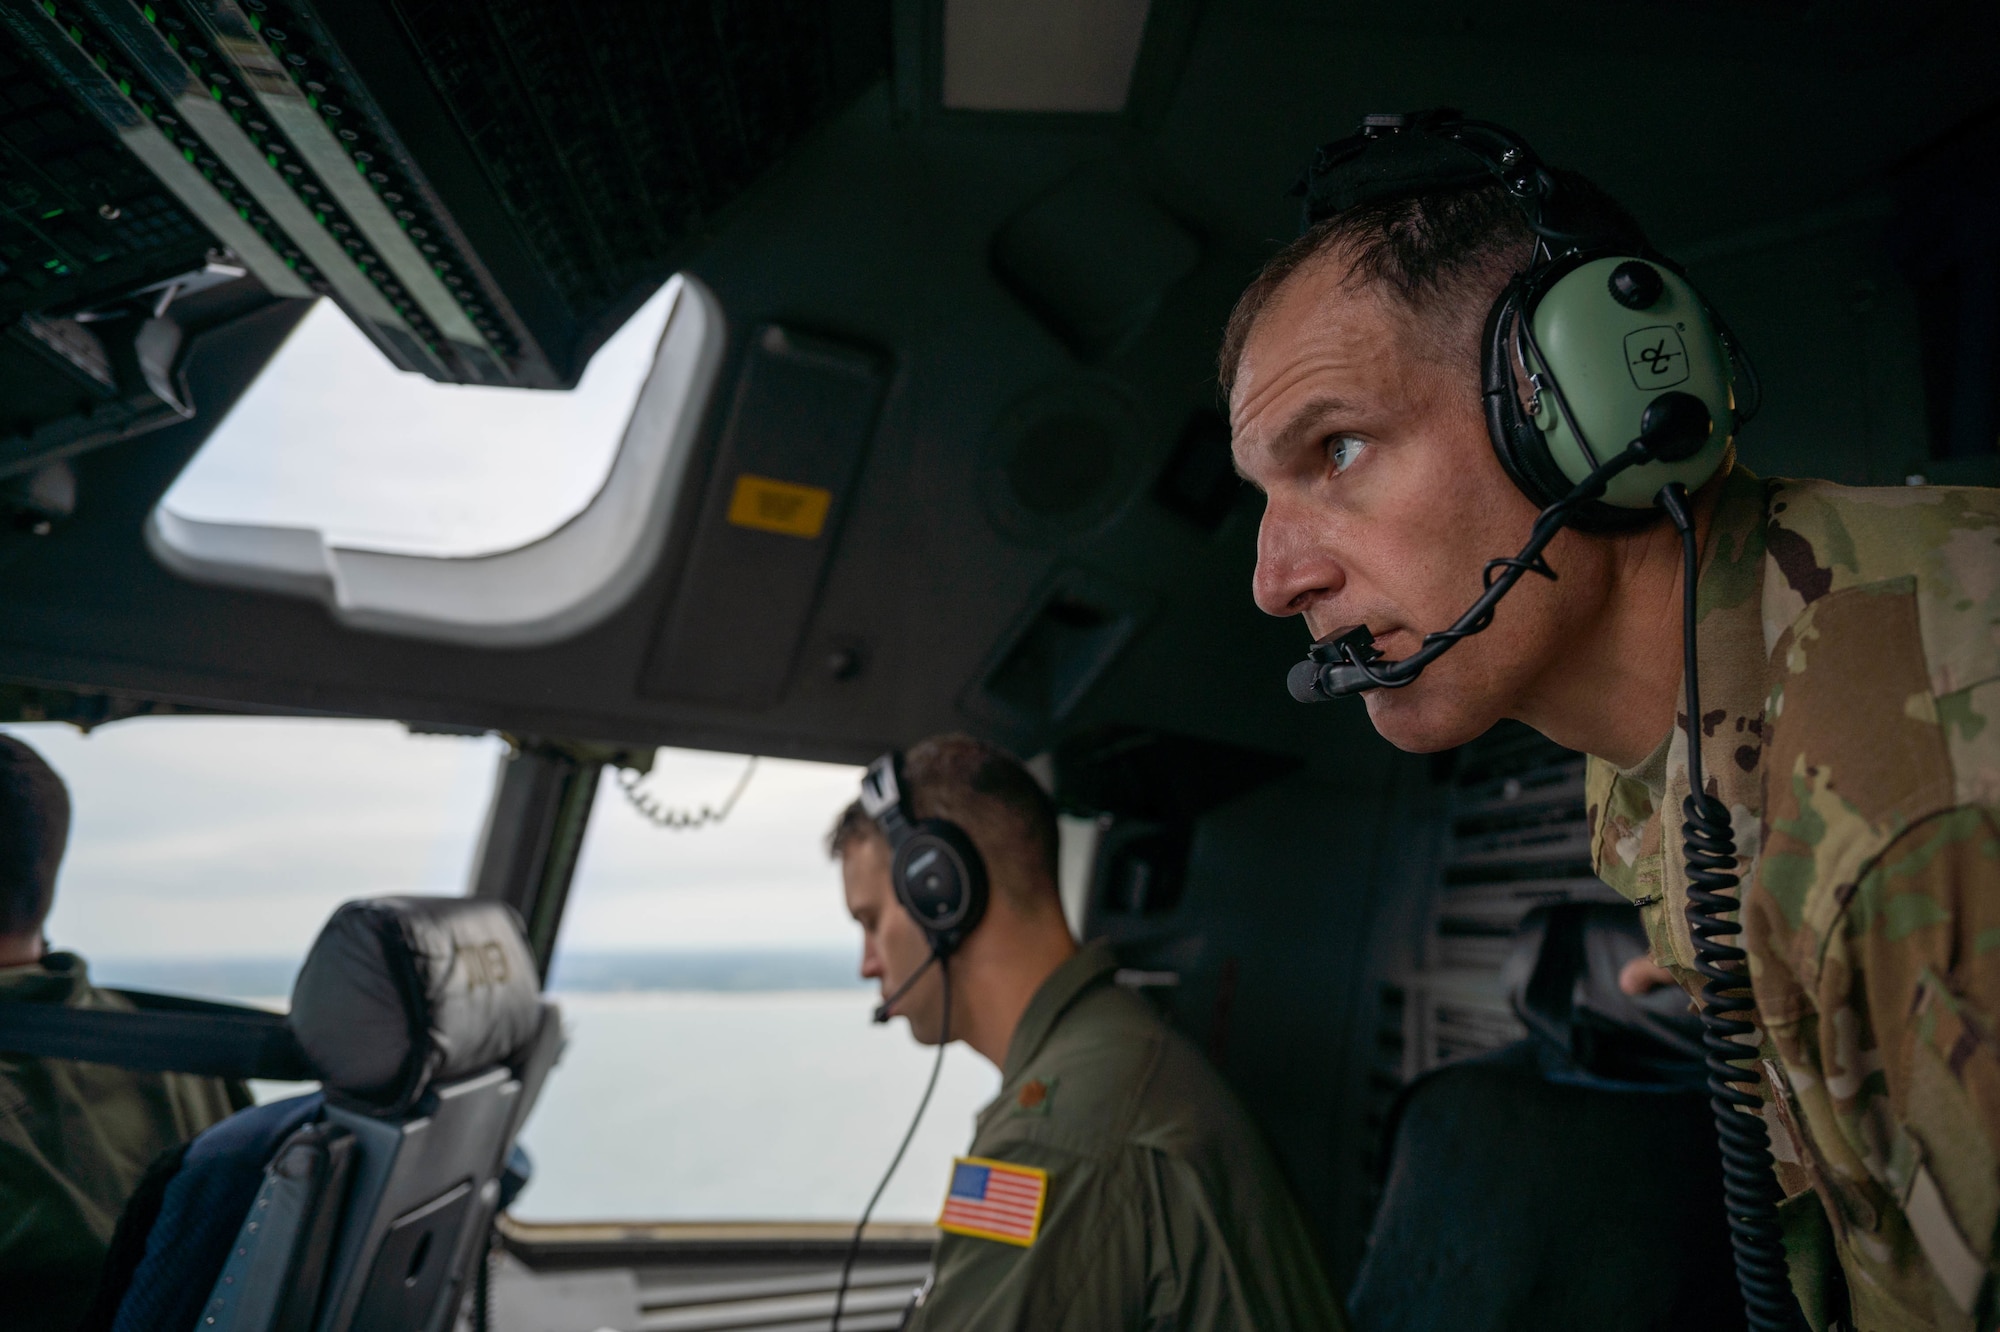 Col. Matt Husemann, 436th Airlift Wing commander, looks out a window from the flight deck of a C-17 Globemaster III during a local training flight over Delaware, Aug. 4, 2021. The 3rd AS routinely trains to ensure aircrew operational readiness to support global operations through delivery of time-critical assets. (U.S. Air Force photo by Senior Airman Faith Schaefer)